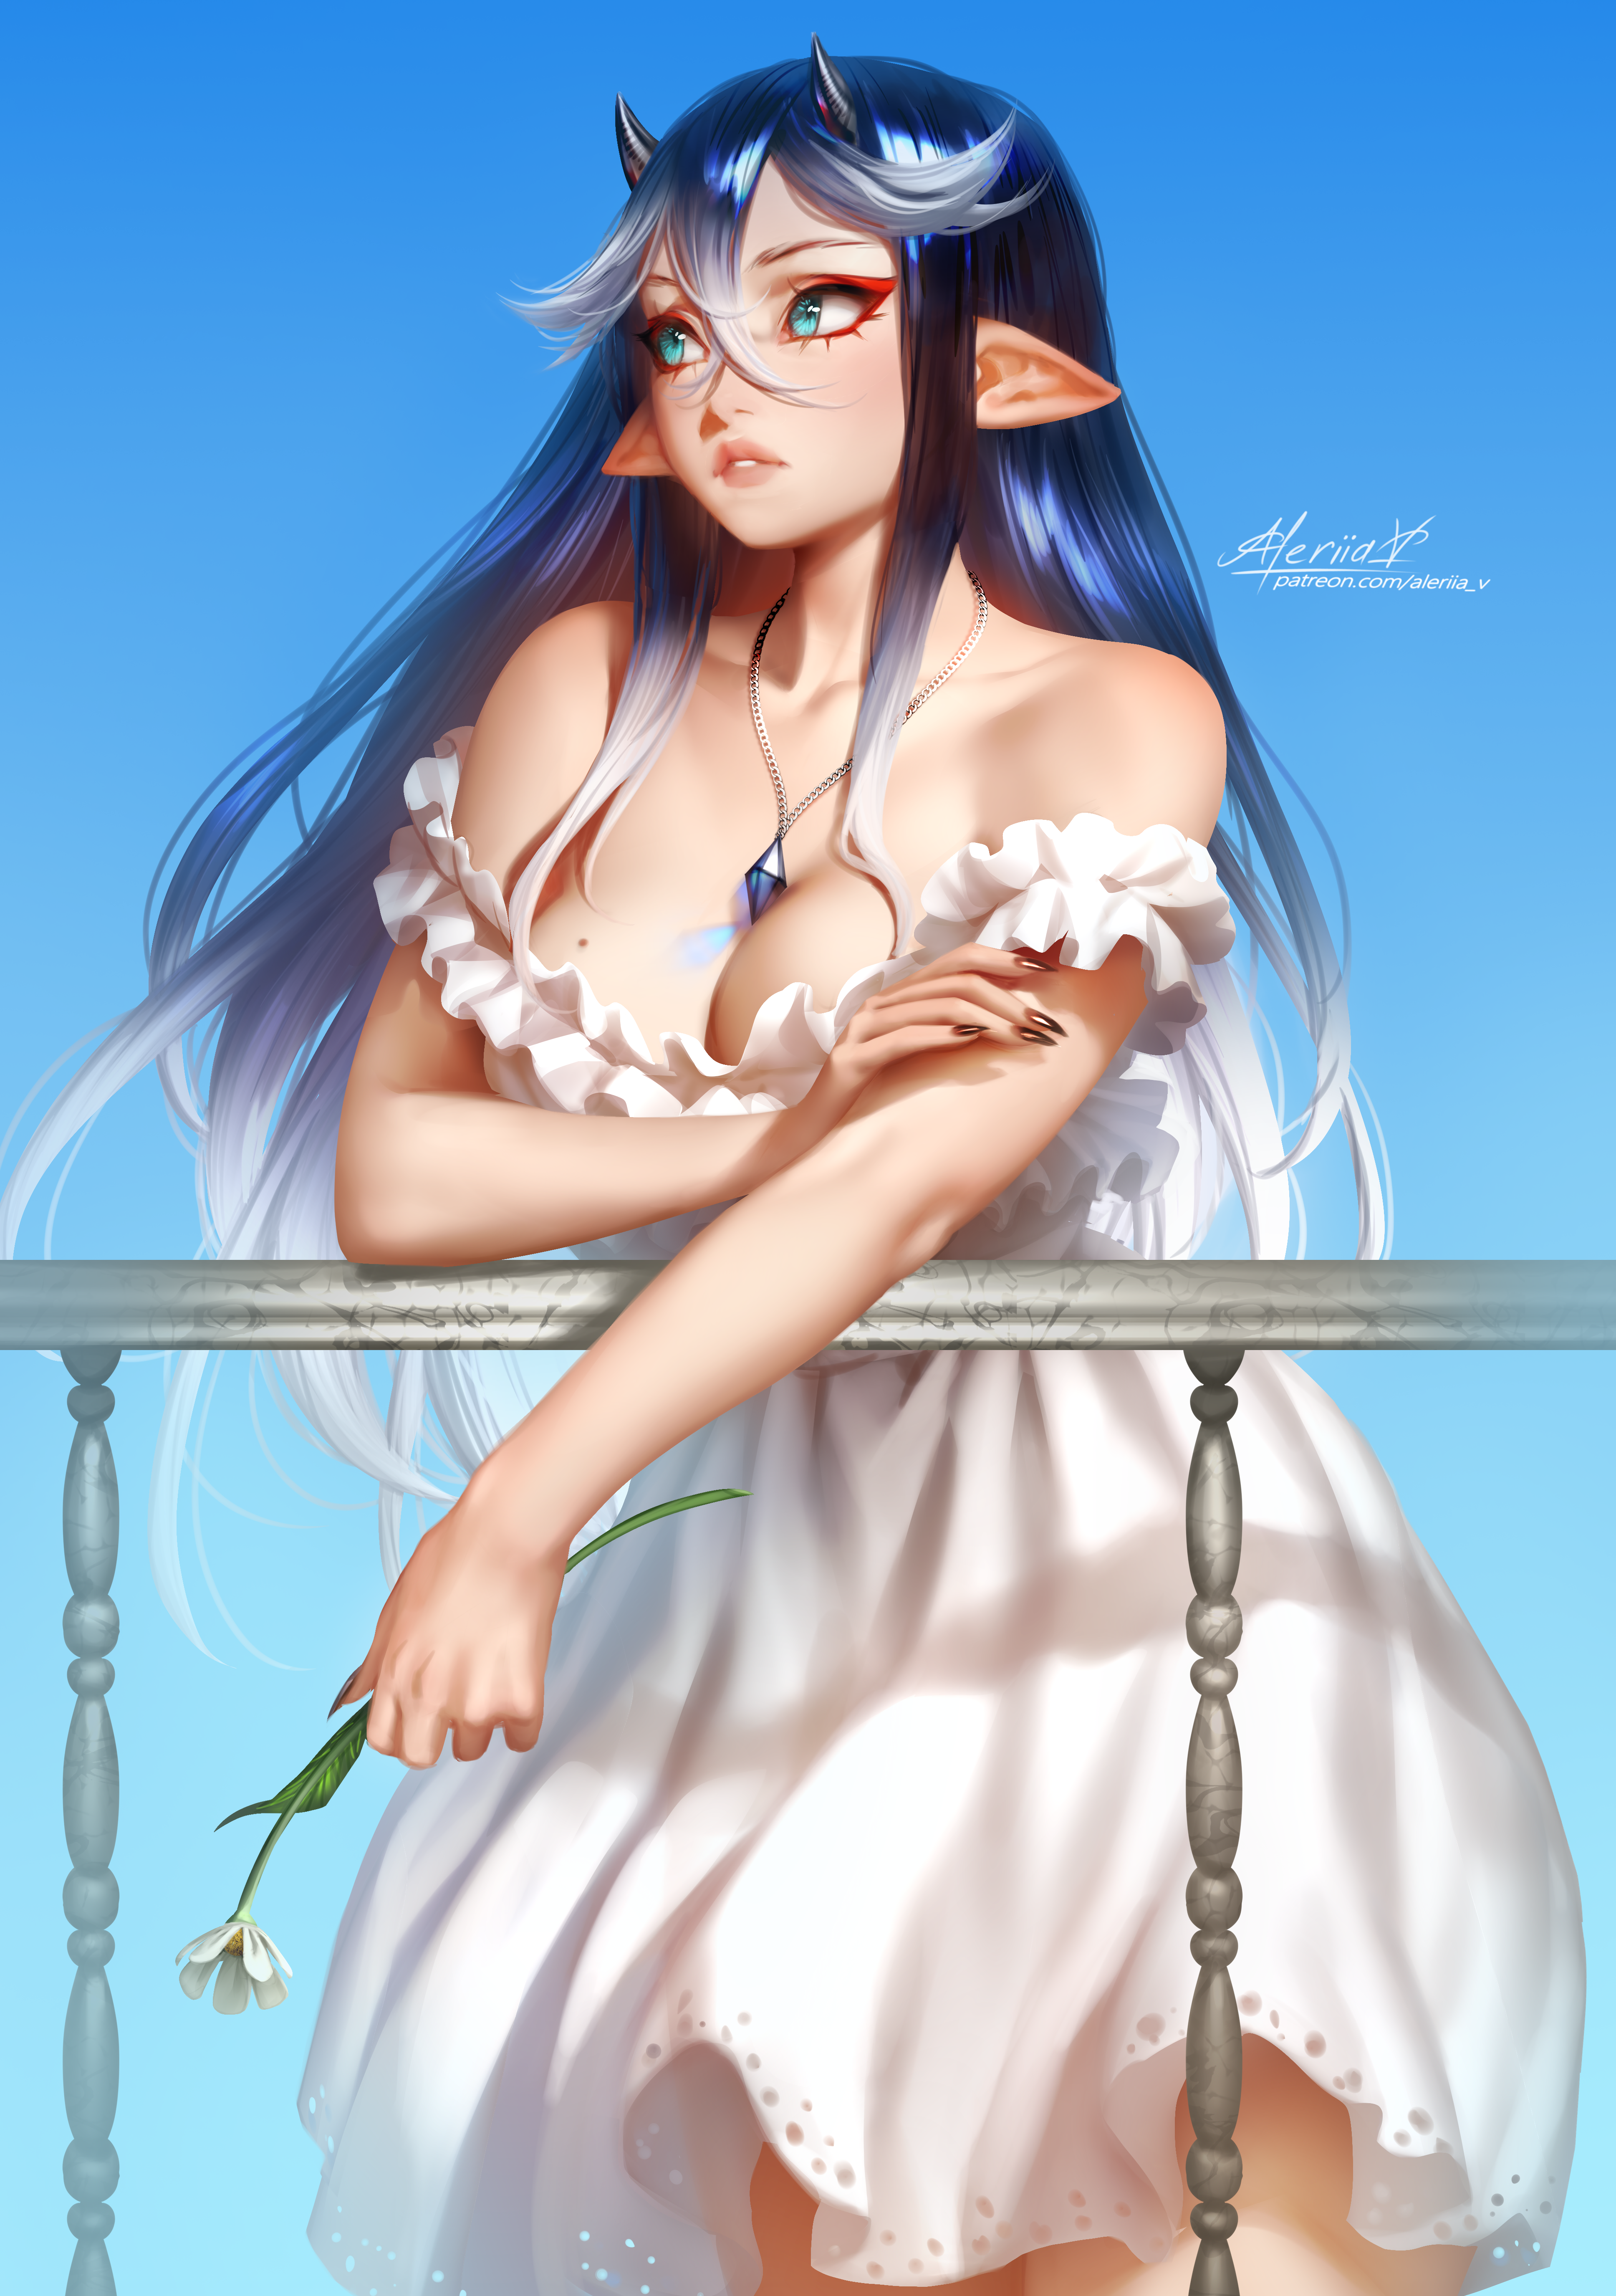 Anime 3872x5500 demon girls pointy ears original characters anime anime girls artwork drawing Lera Pi portrait display looking away cleavage big boobs necklace dress flowers